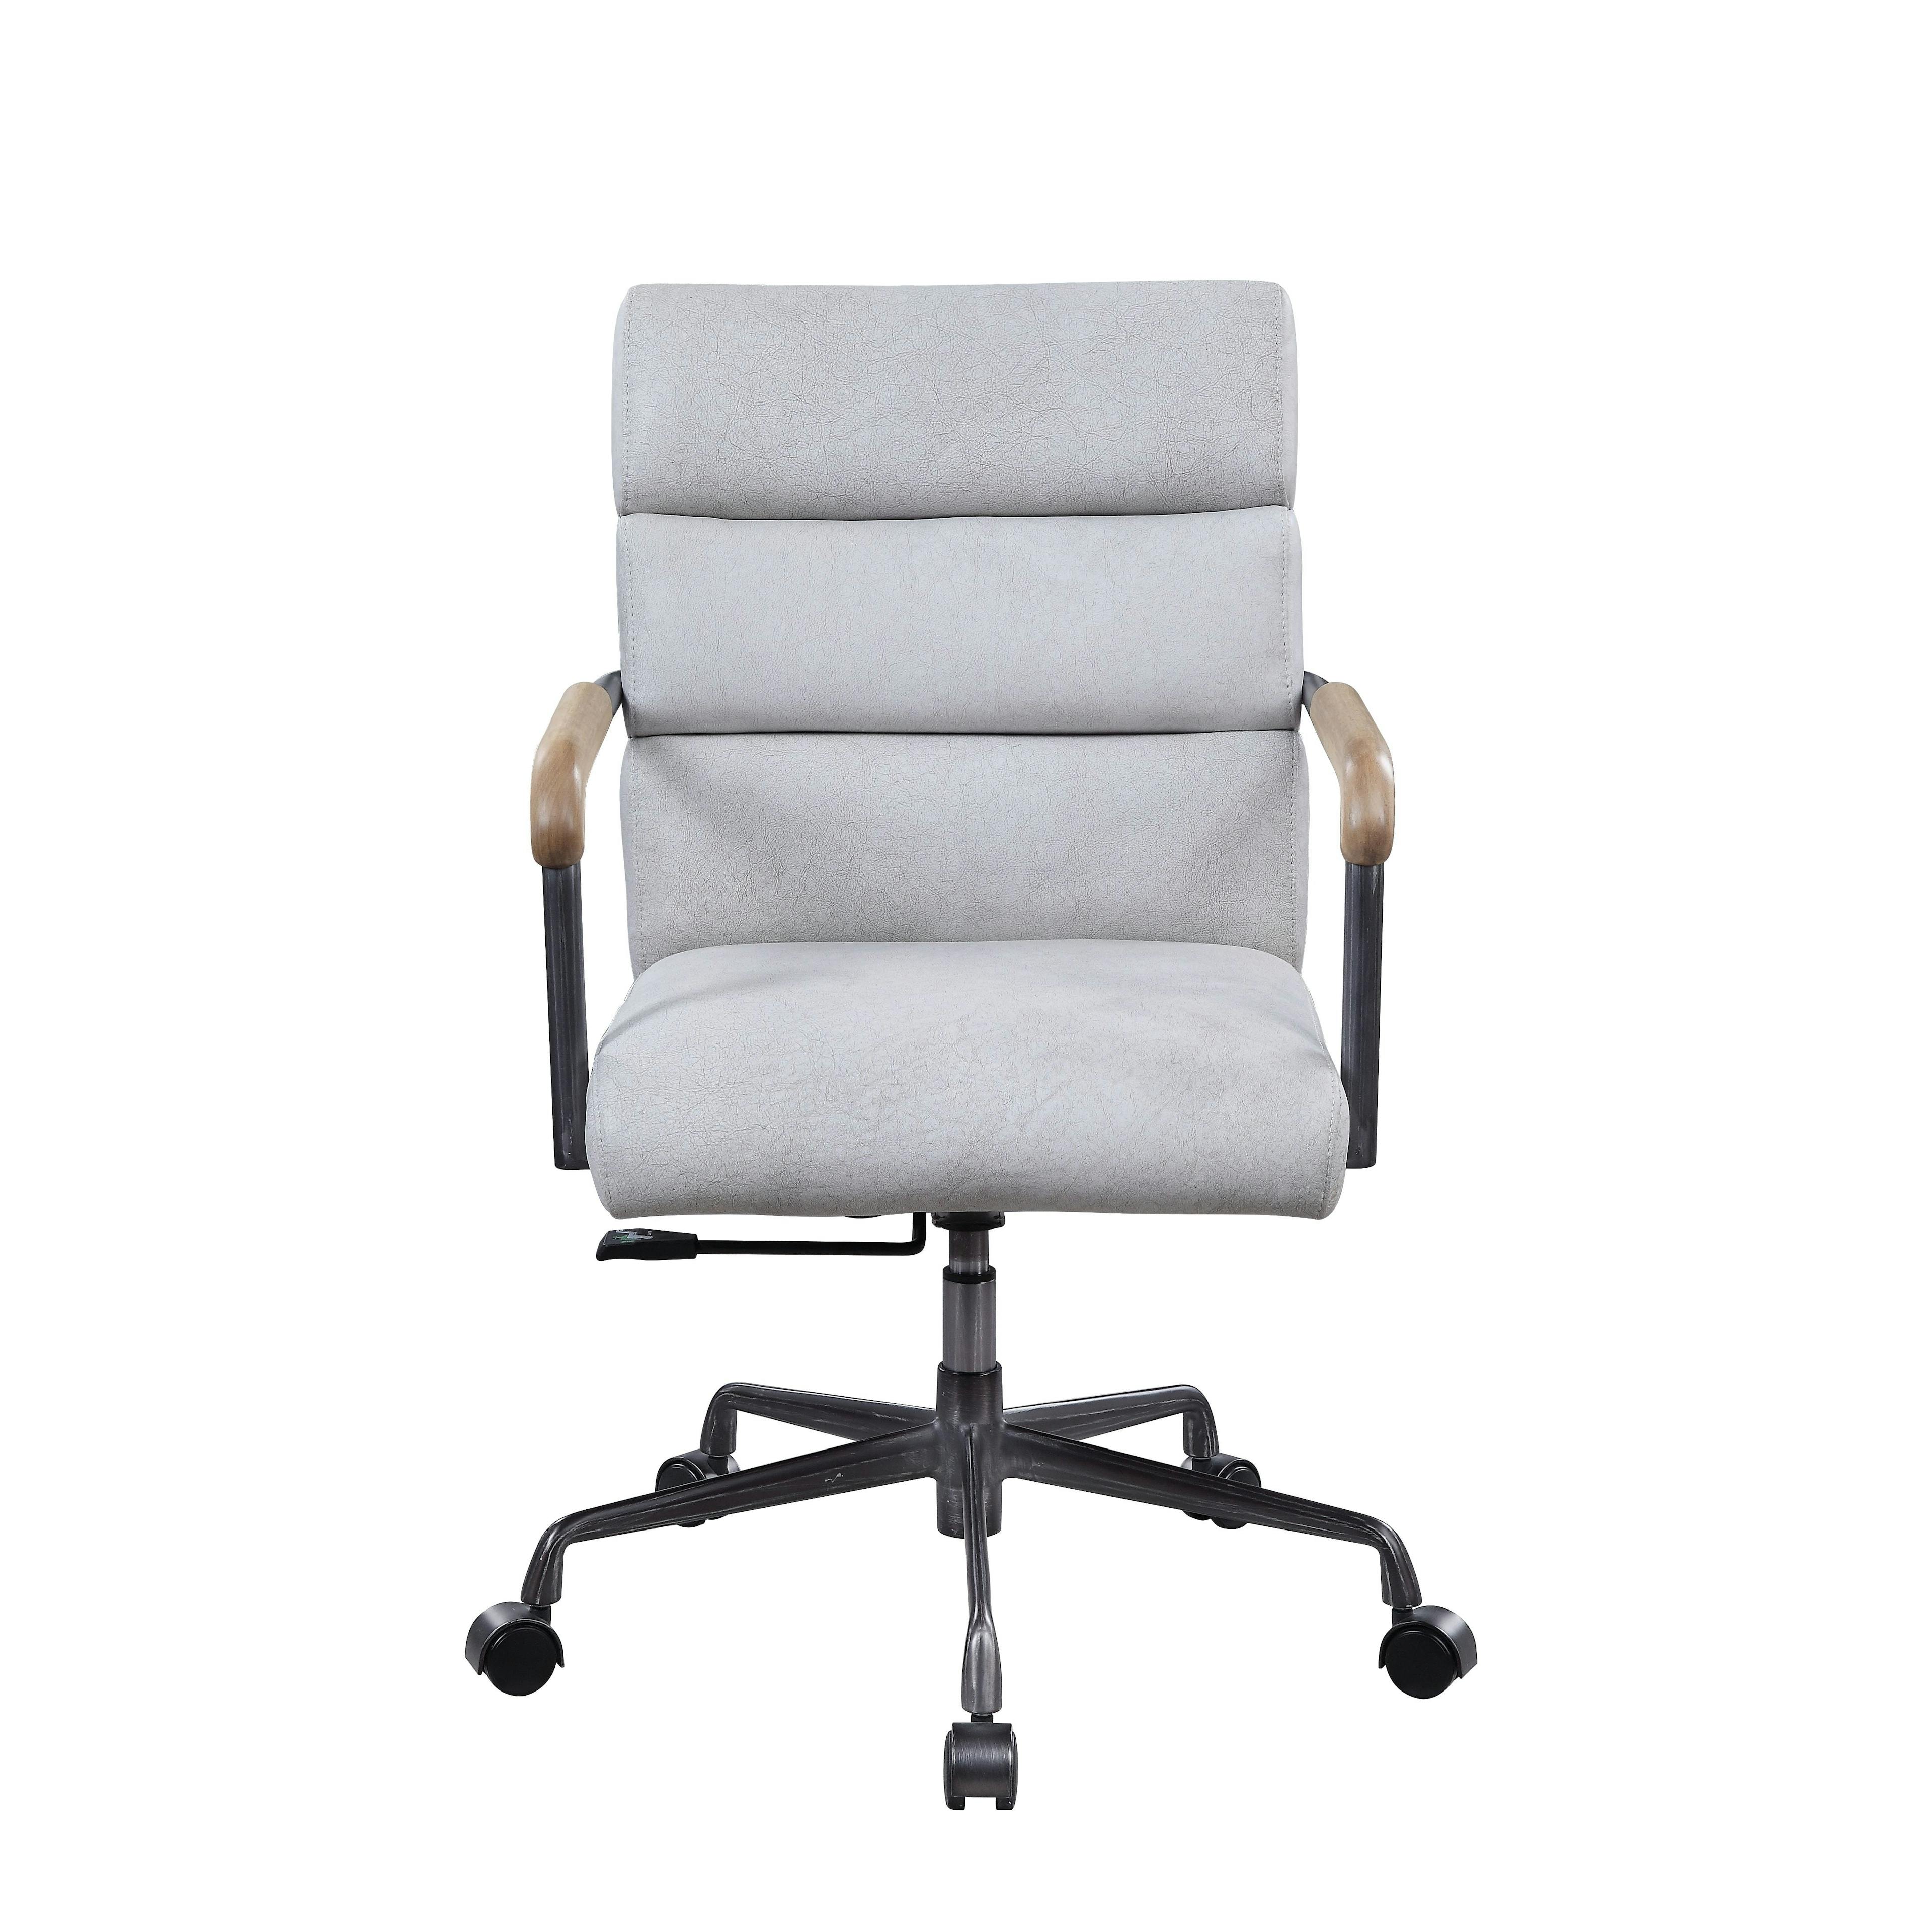 Halcyon Vintage White Leather Swivel Executive Office Chair